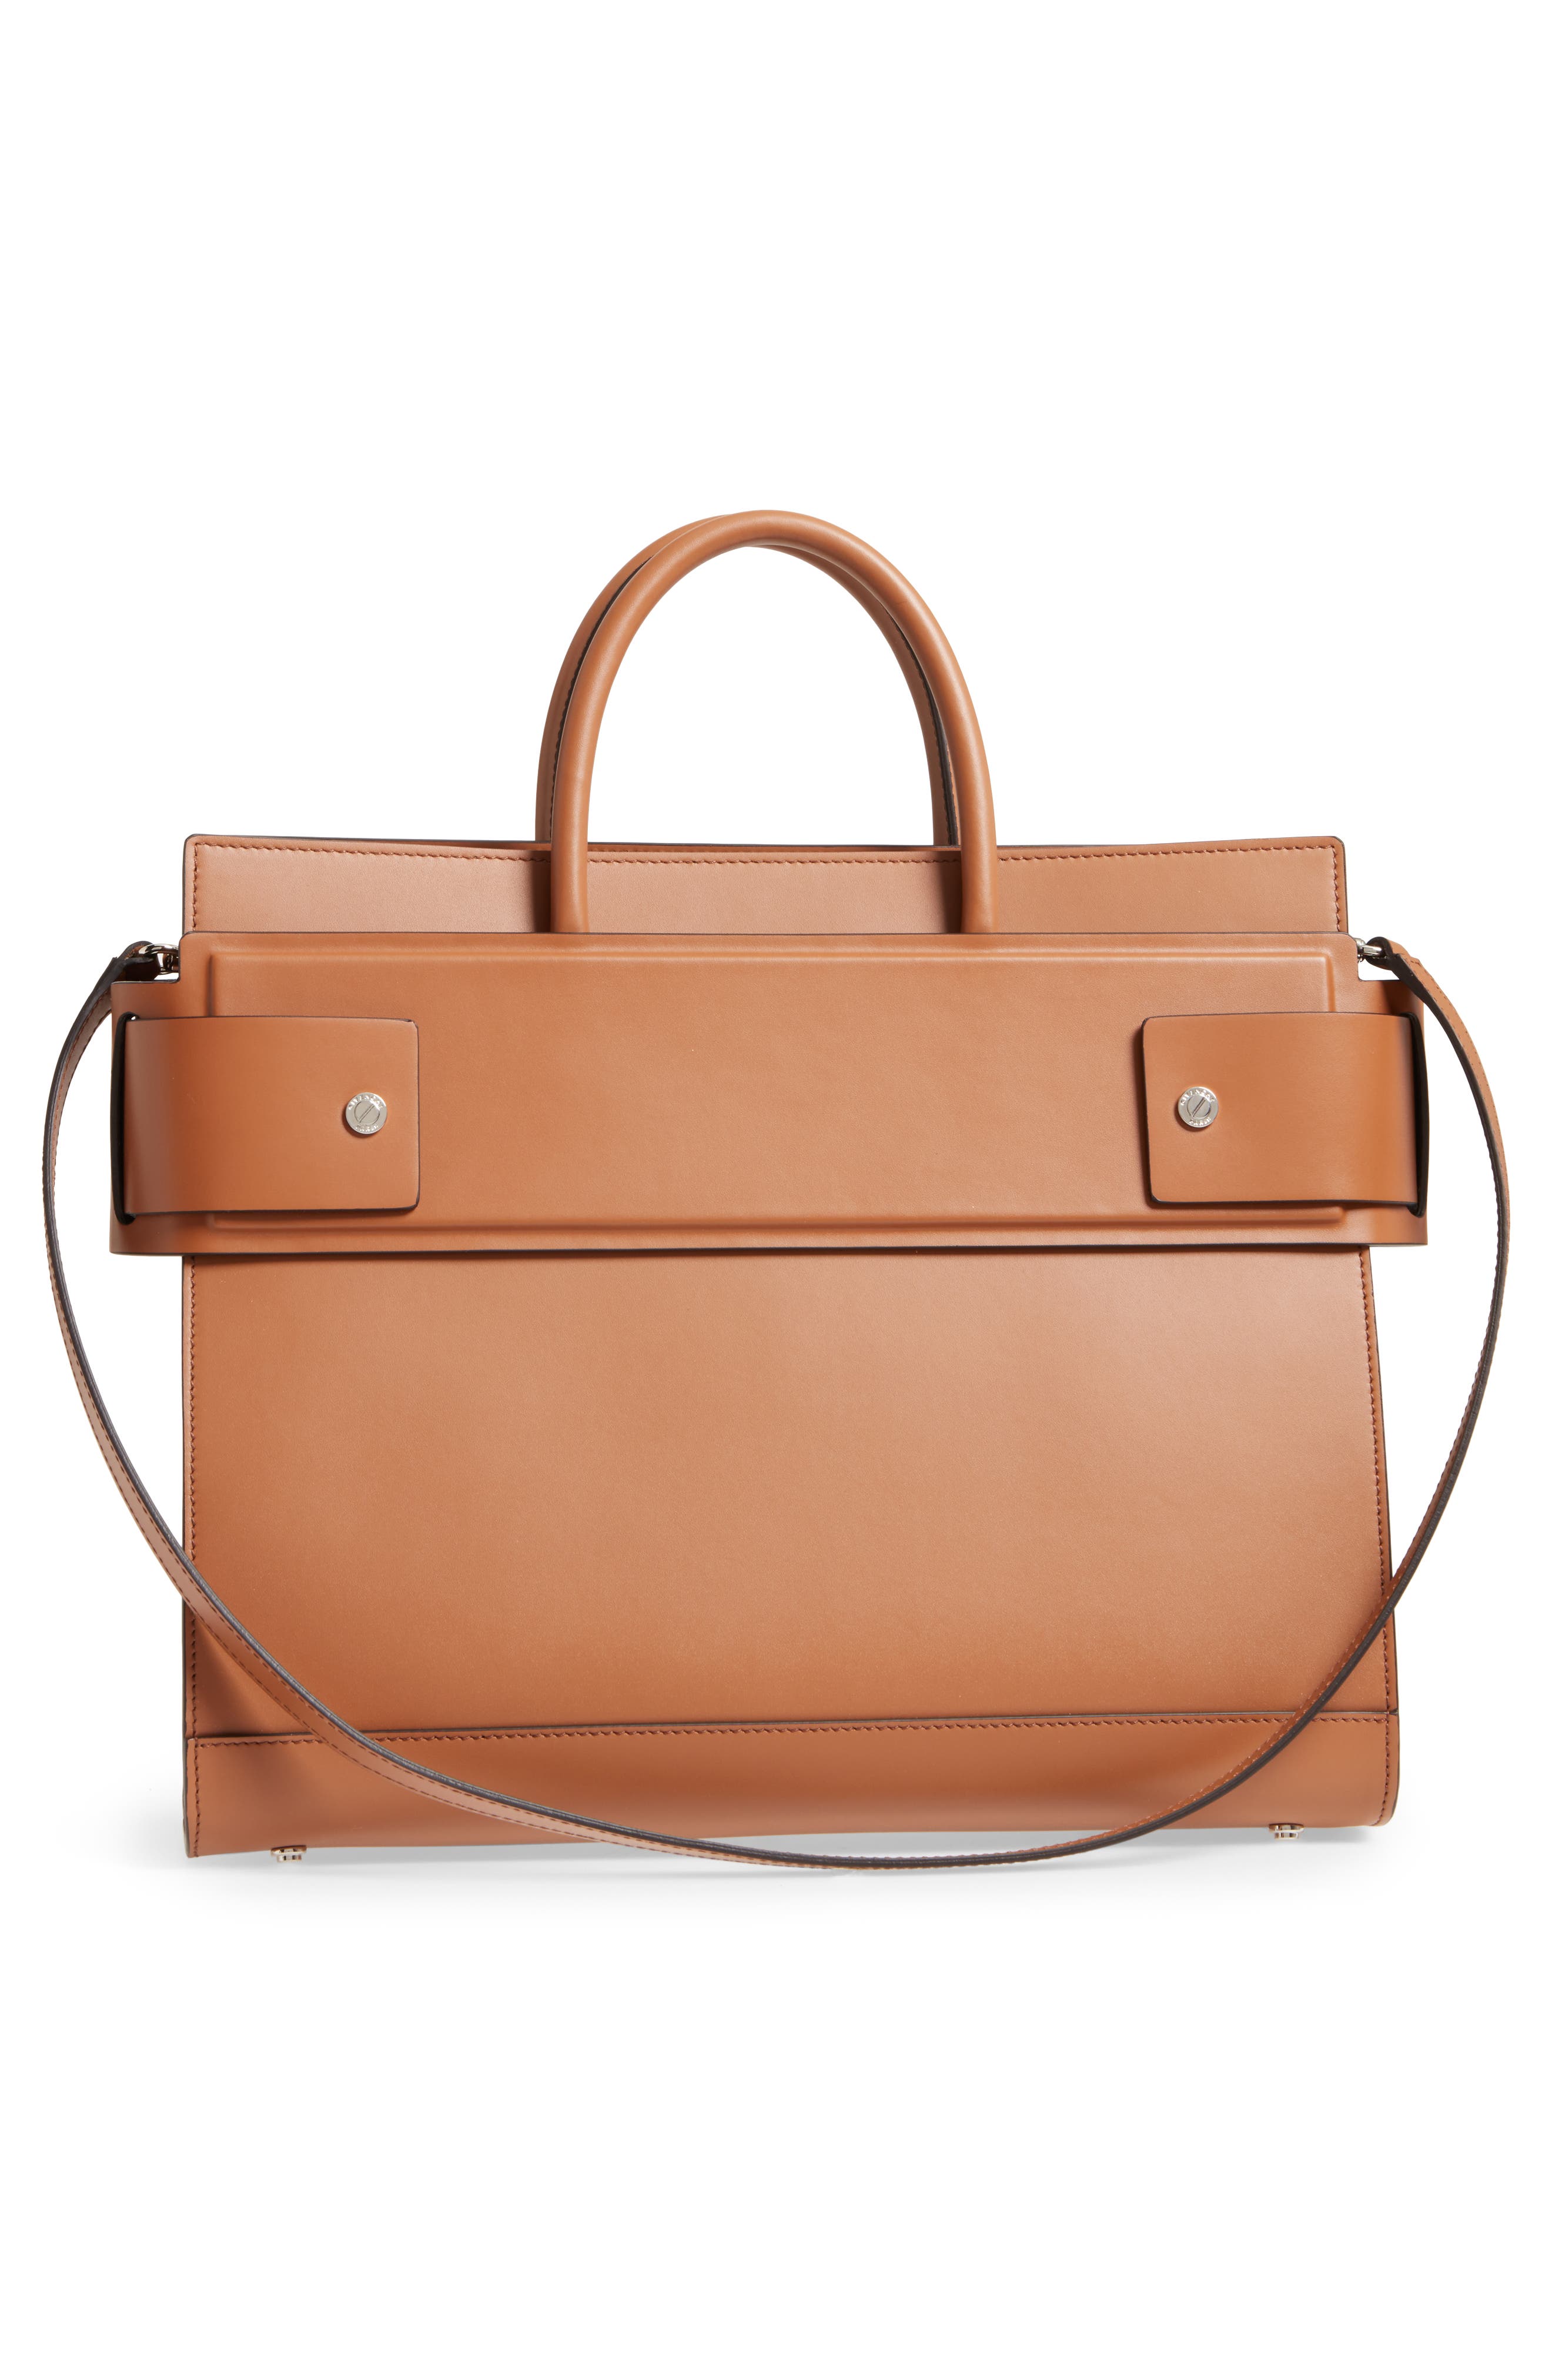 GIVENCHY Horizon Small Smooth Leather Satchel Bag W/Contrast Lining in ...